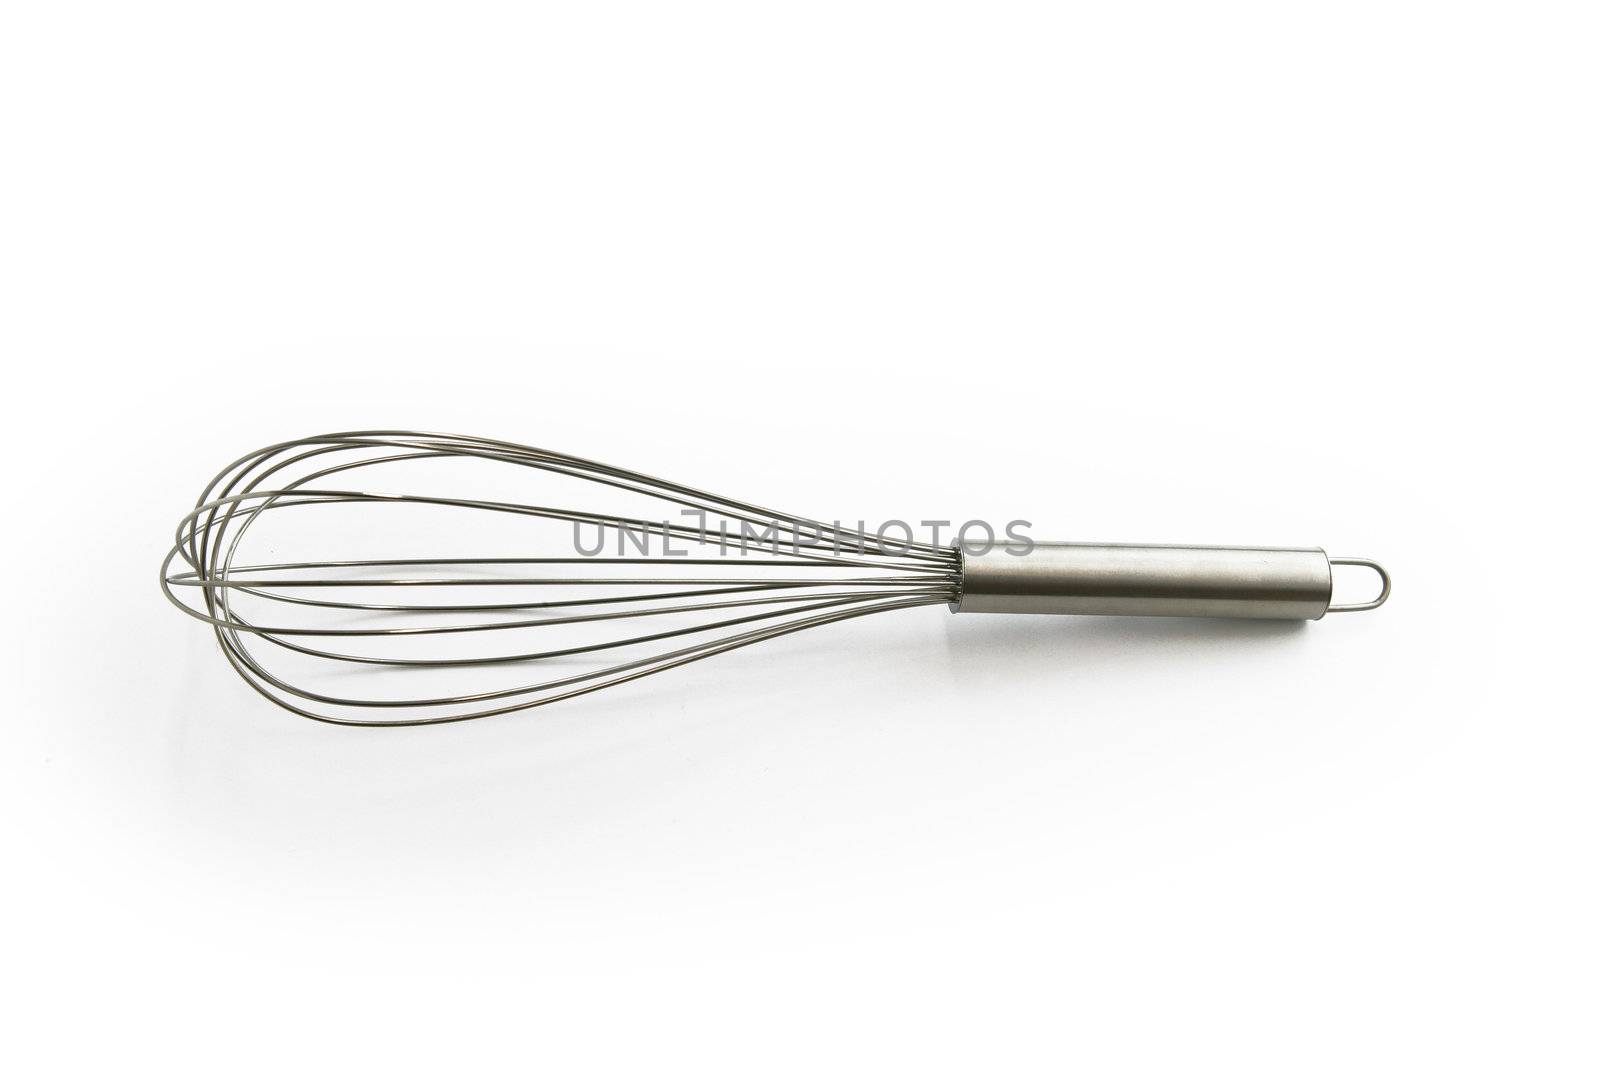 Metal balloon whisk by phovoir